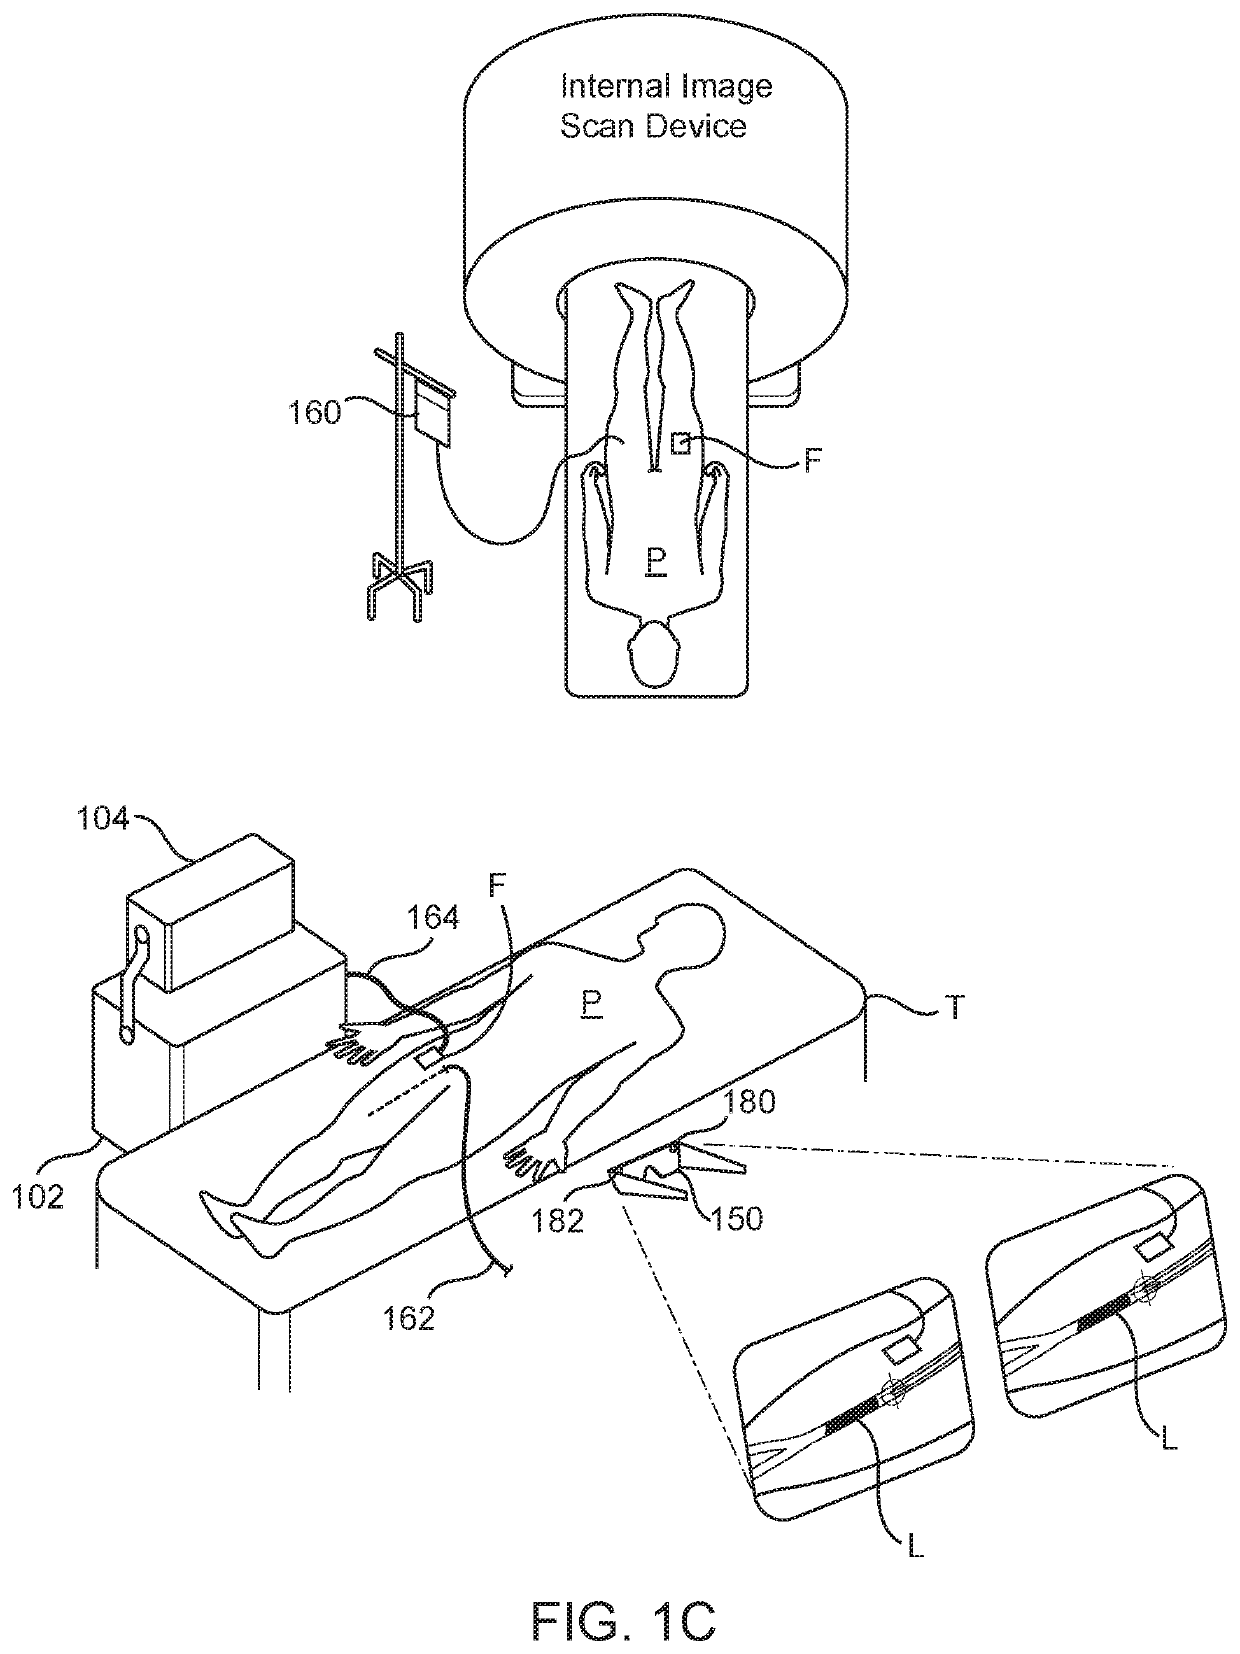 Enhanced reality medical guidance systems and methods of use